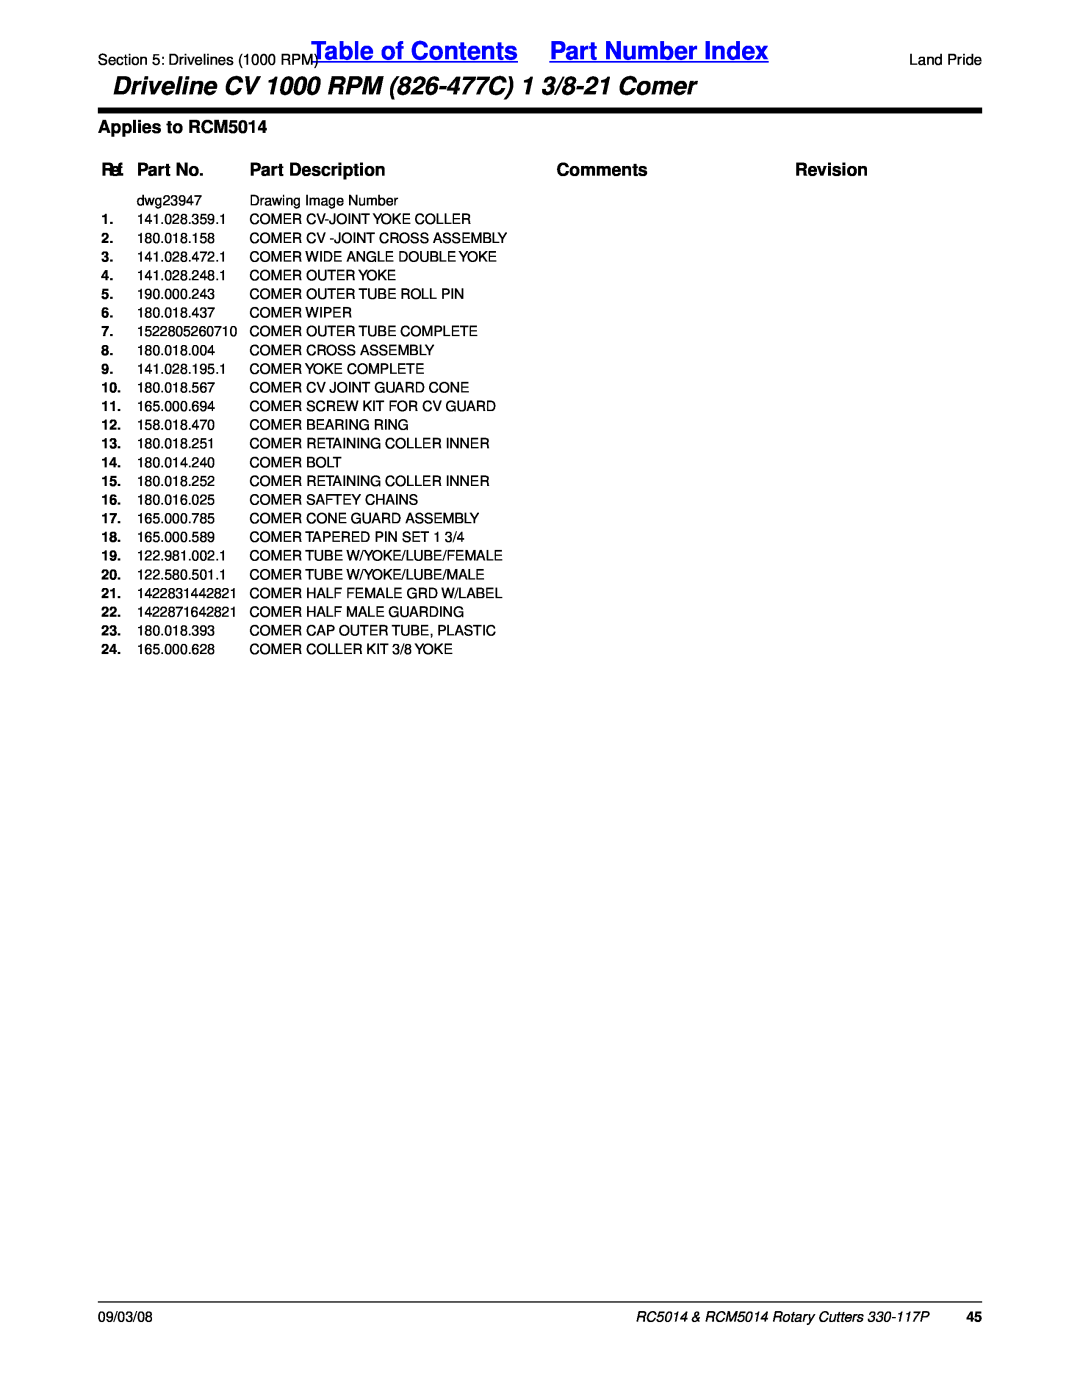 Land Pride manual Table of Contents, Part Number Index, Driveline CV 1000 RPM 826-477C1 3/8-21Comer, Applies to RCM5014 